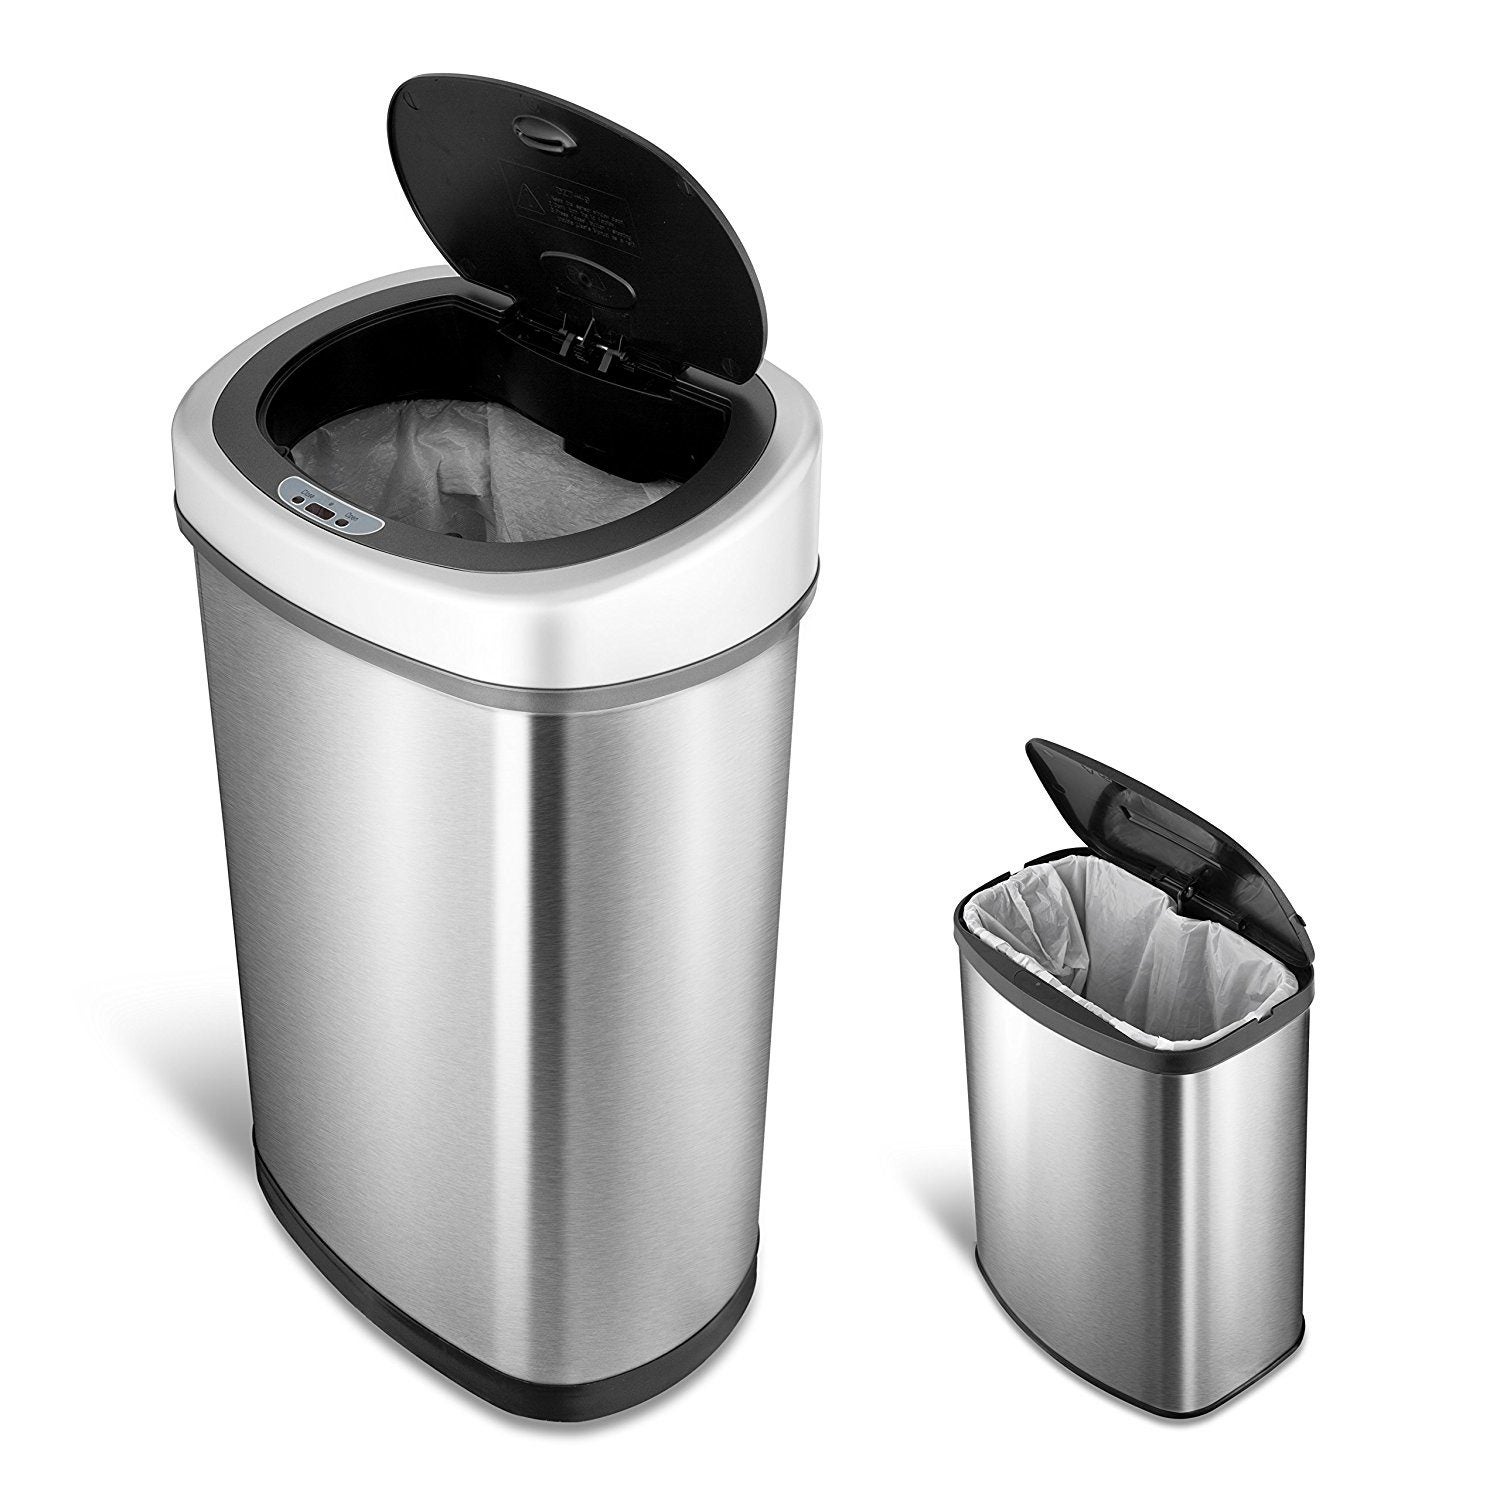 Amazing costco trash can touchless Costco Ca Honey Can Do Stainless Steel 50l 12l Trash Cans With Sensors 99 97 Redflagdeals Com Forums